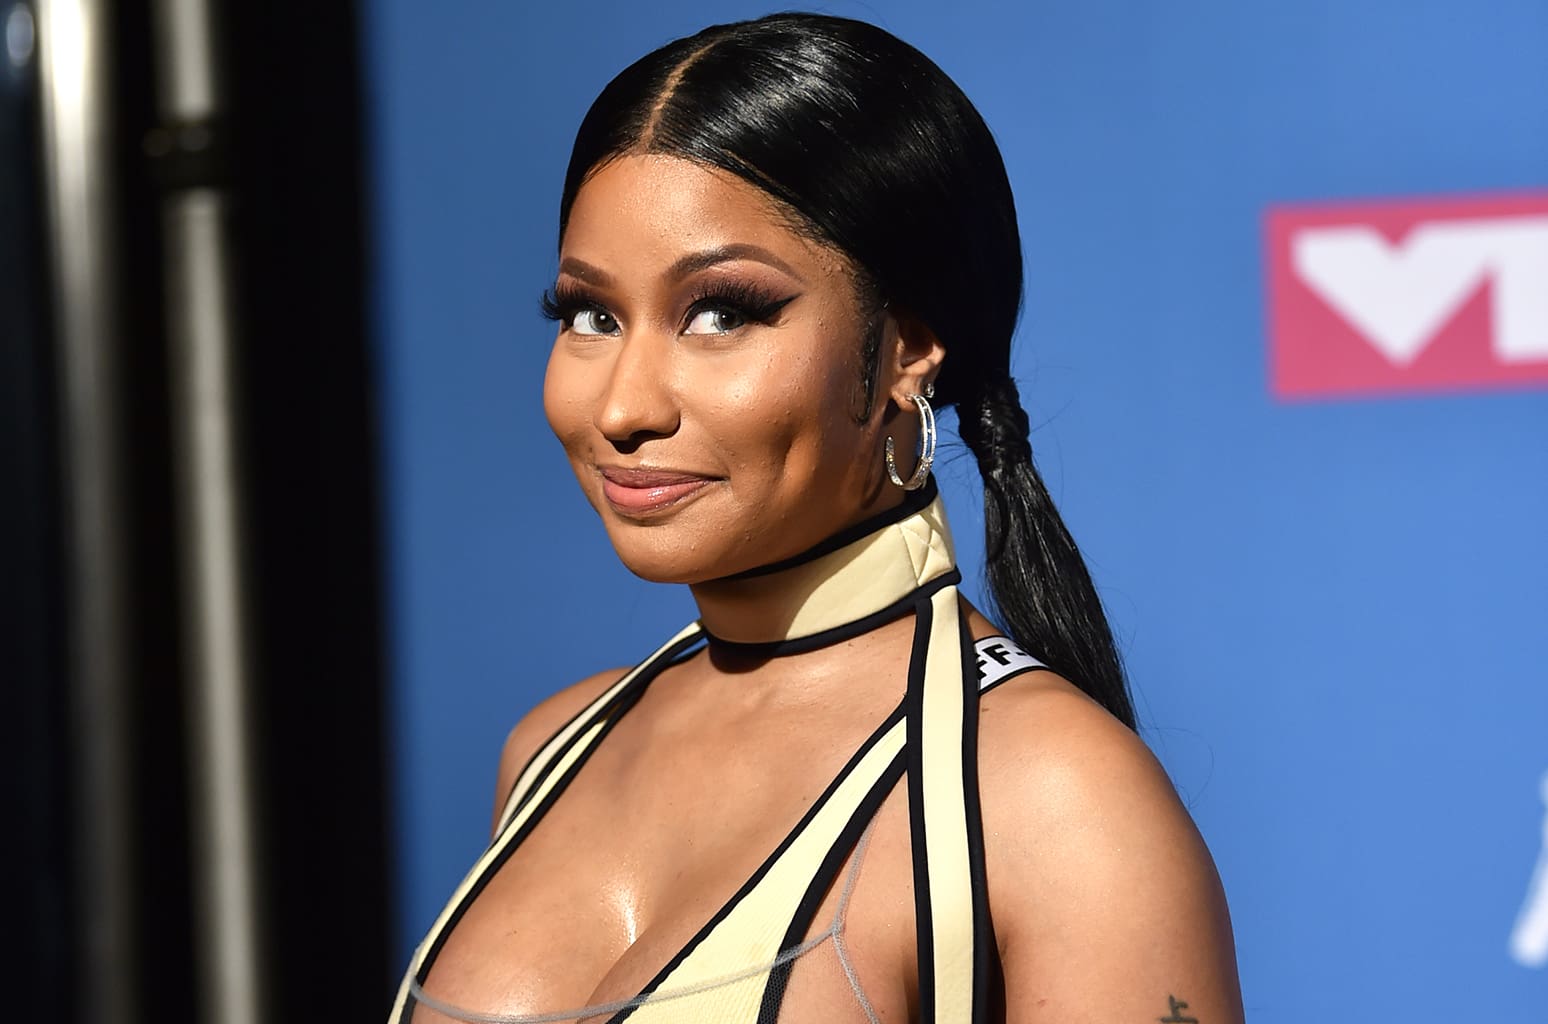 Nicki Minaj Has Baby Fever: ‘I’m Obsessed With Babies’ – Is She Considering ...1548 x 1024